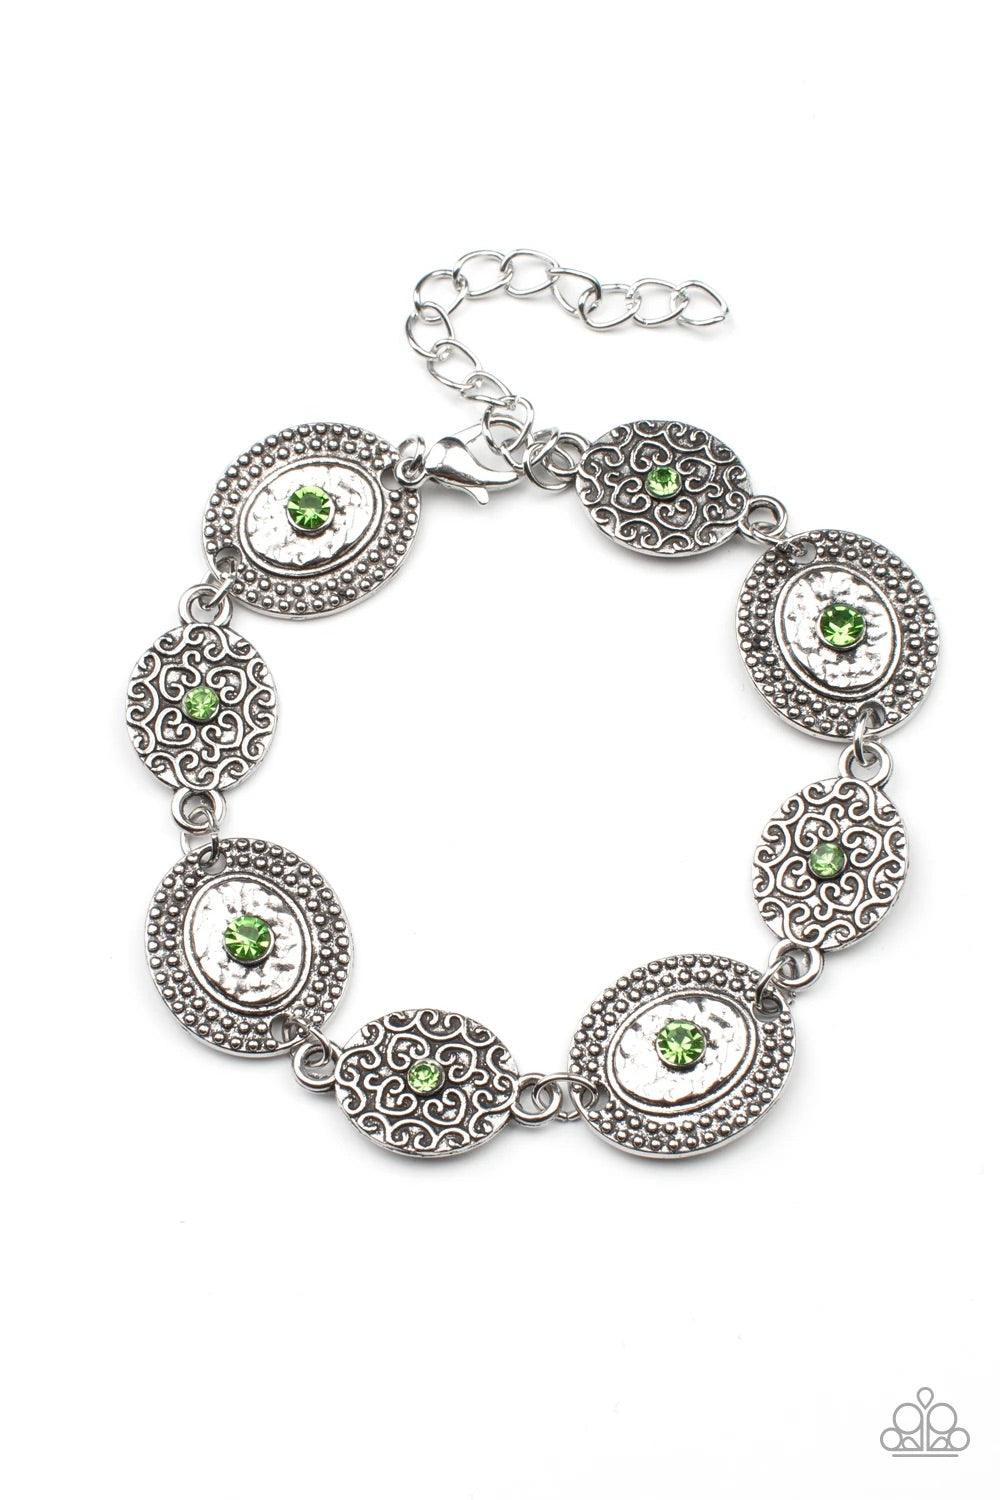 Paparazzi Accessories Secret Garden Glamour - Green Delicate Peridot rhinestones dot the centers of engraved antiqued silver discs. The dotted textures and heart shaped vines create a charming impression as they gracefully link around the wrist. Features